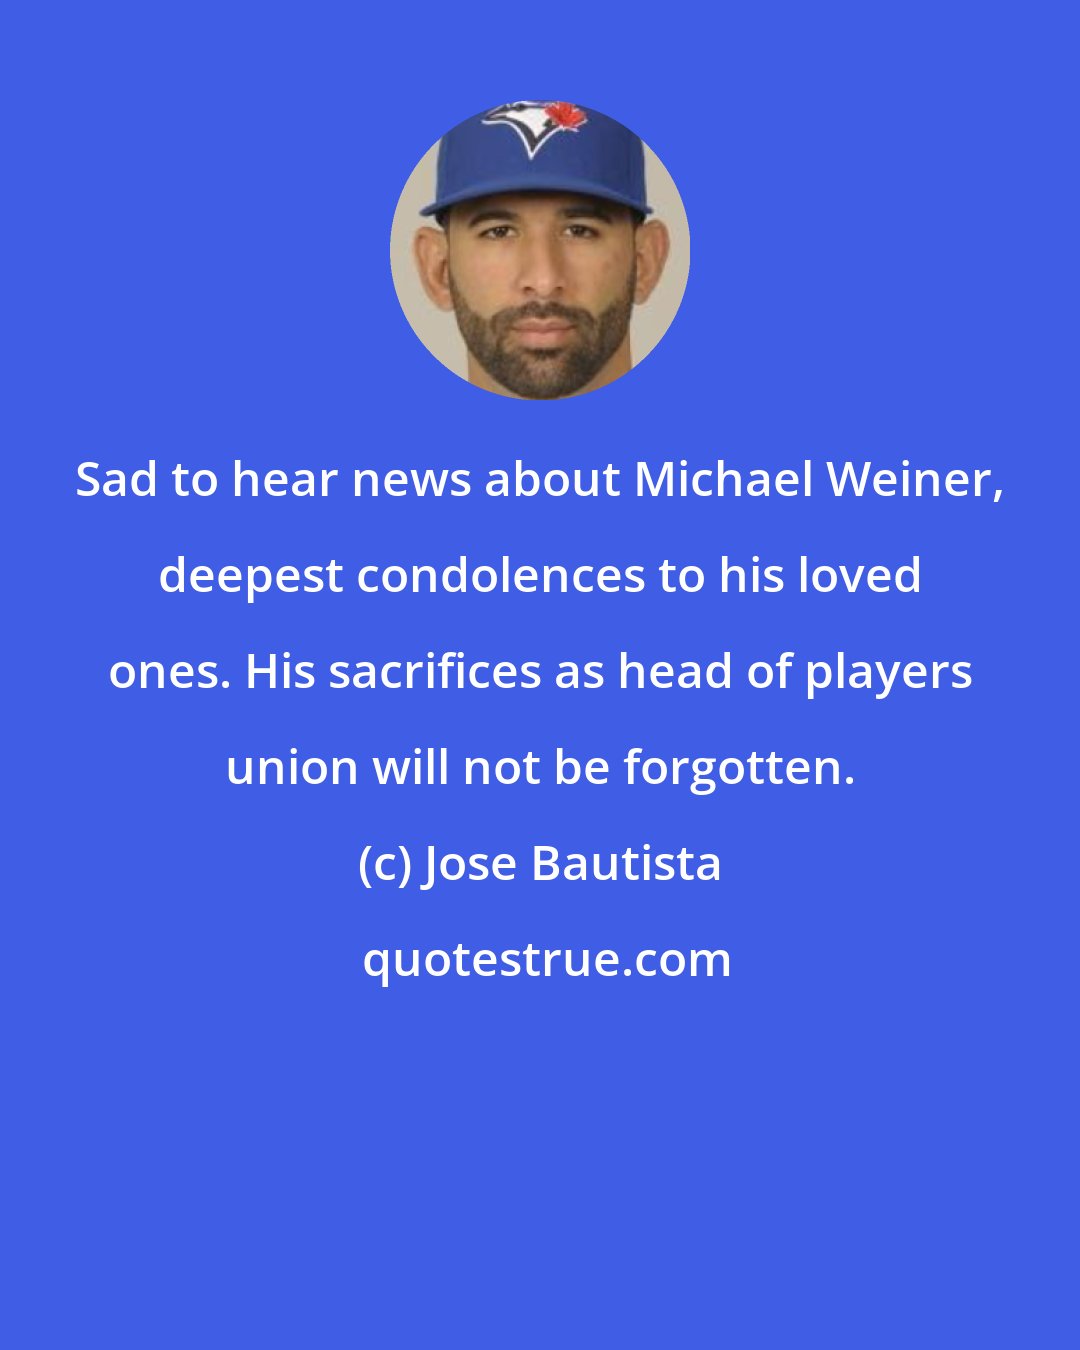 Jose Bautista: Sad to hear news about Michael Weiner, deepest condolences to his loved ones. His sacrifices as head of players union will not be forgotten.